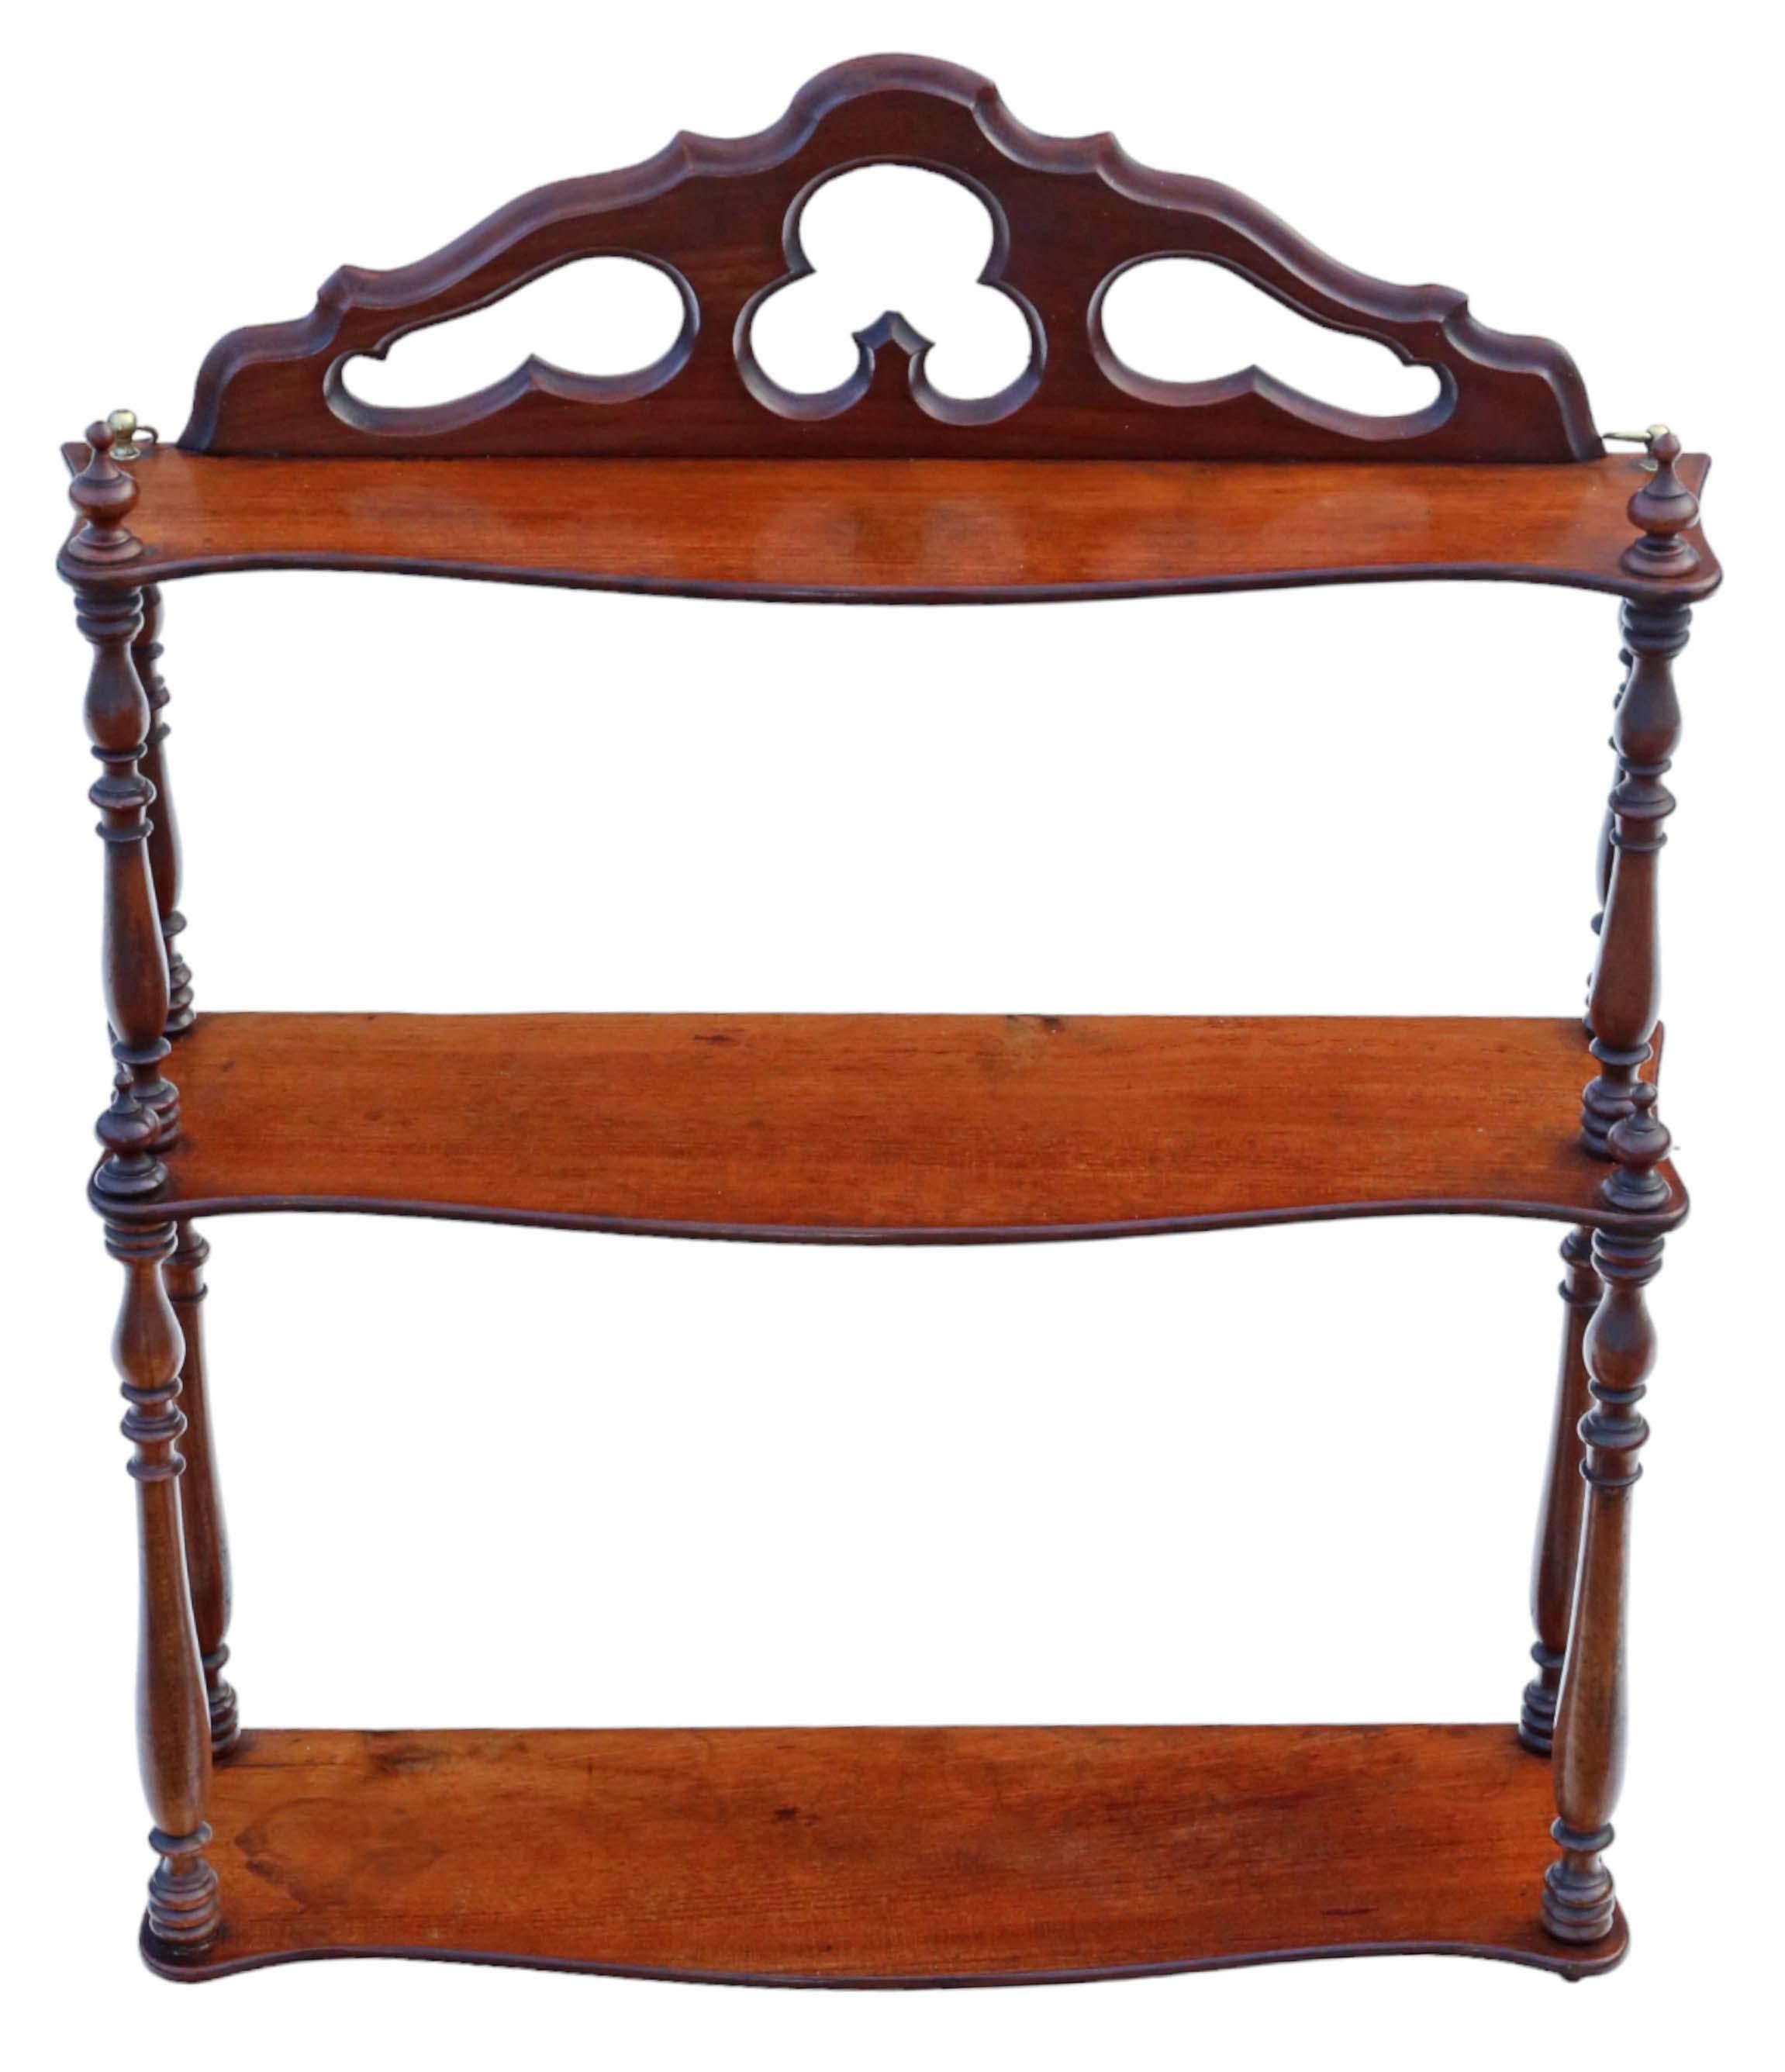 Antique Victorian Gothic 19th Century mahogany bookcase wall shelves of exceptional quality.

This piece is replete with age, charm, and character, offering a solid structure with no loose joints and no woodworm.

Its presence would be striking in